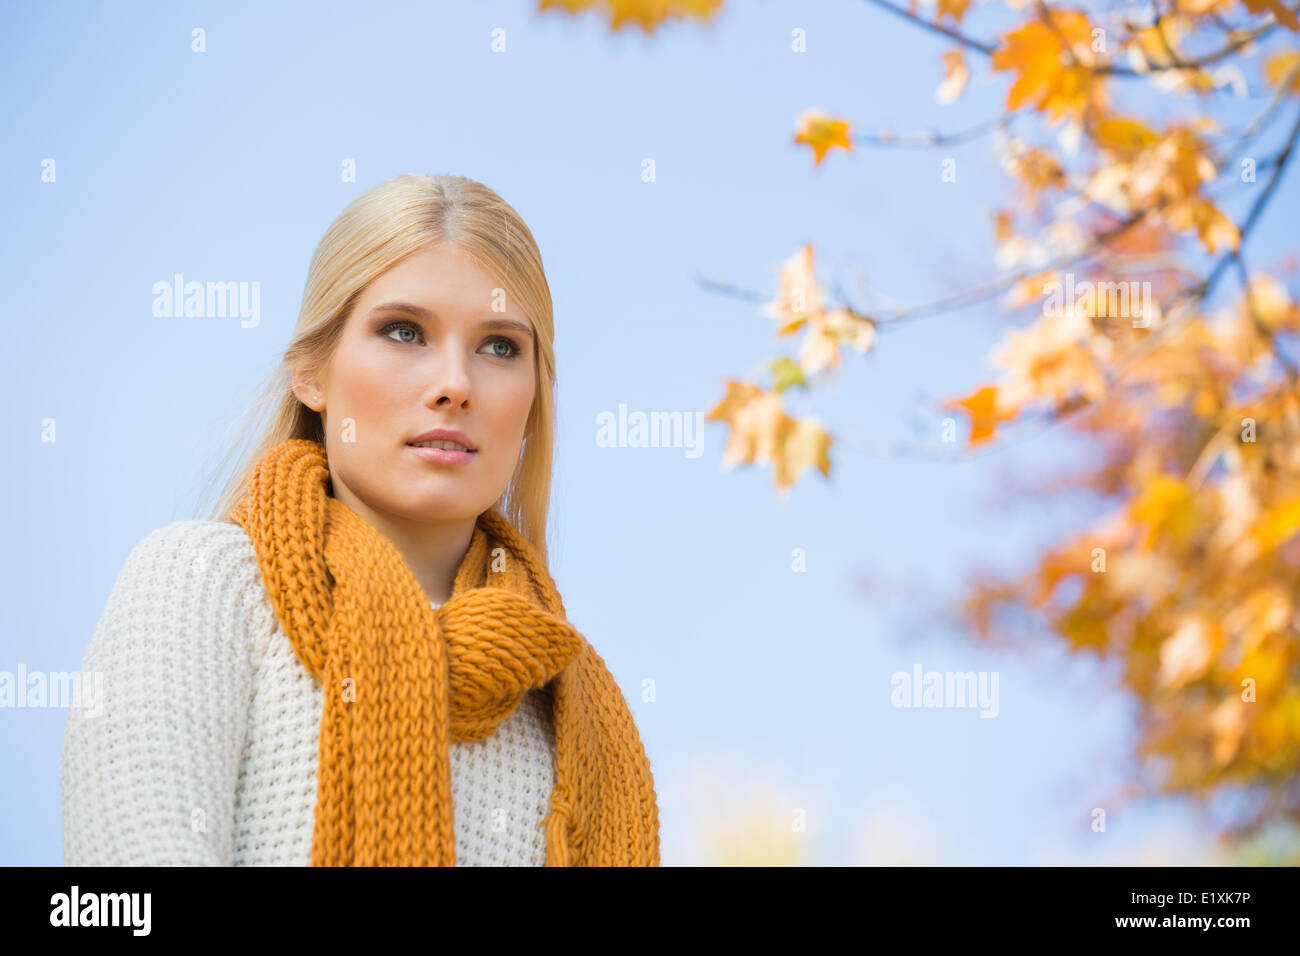 Low angle view of thoughtful young woman against sky Stock Photo